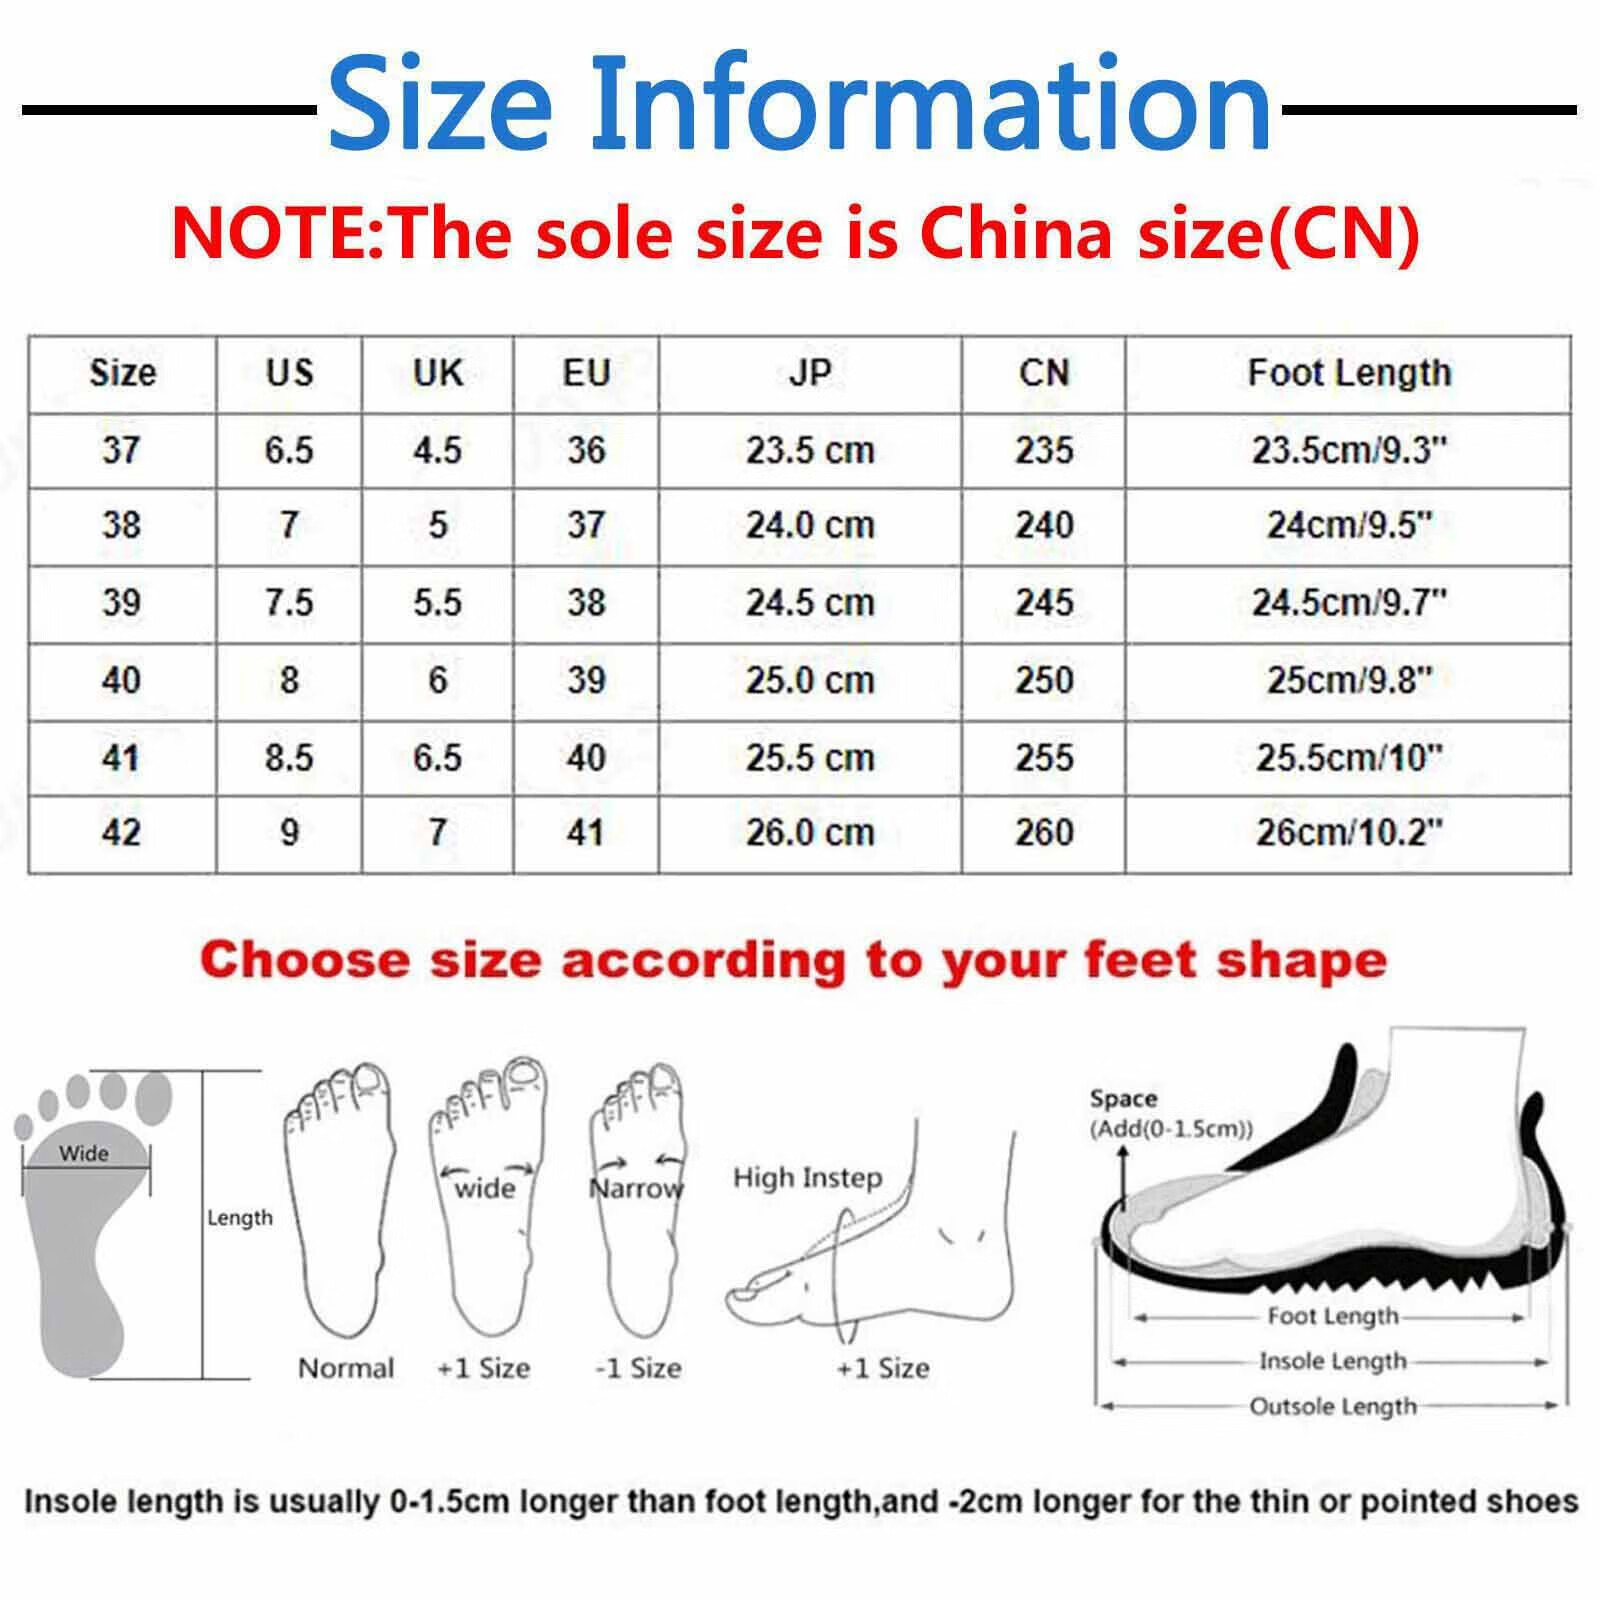 Casual Shoes for Women Women'S Canvas Dance Shoes Soft Soled Training Shoes Ballet Shoes Casual Sandals Dance Shoes Women Casual Shoes Canvas Black 41 - image 4 of 6